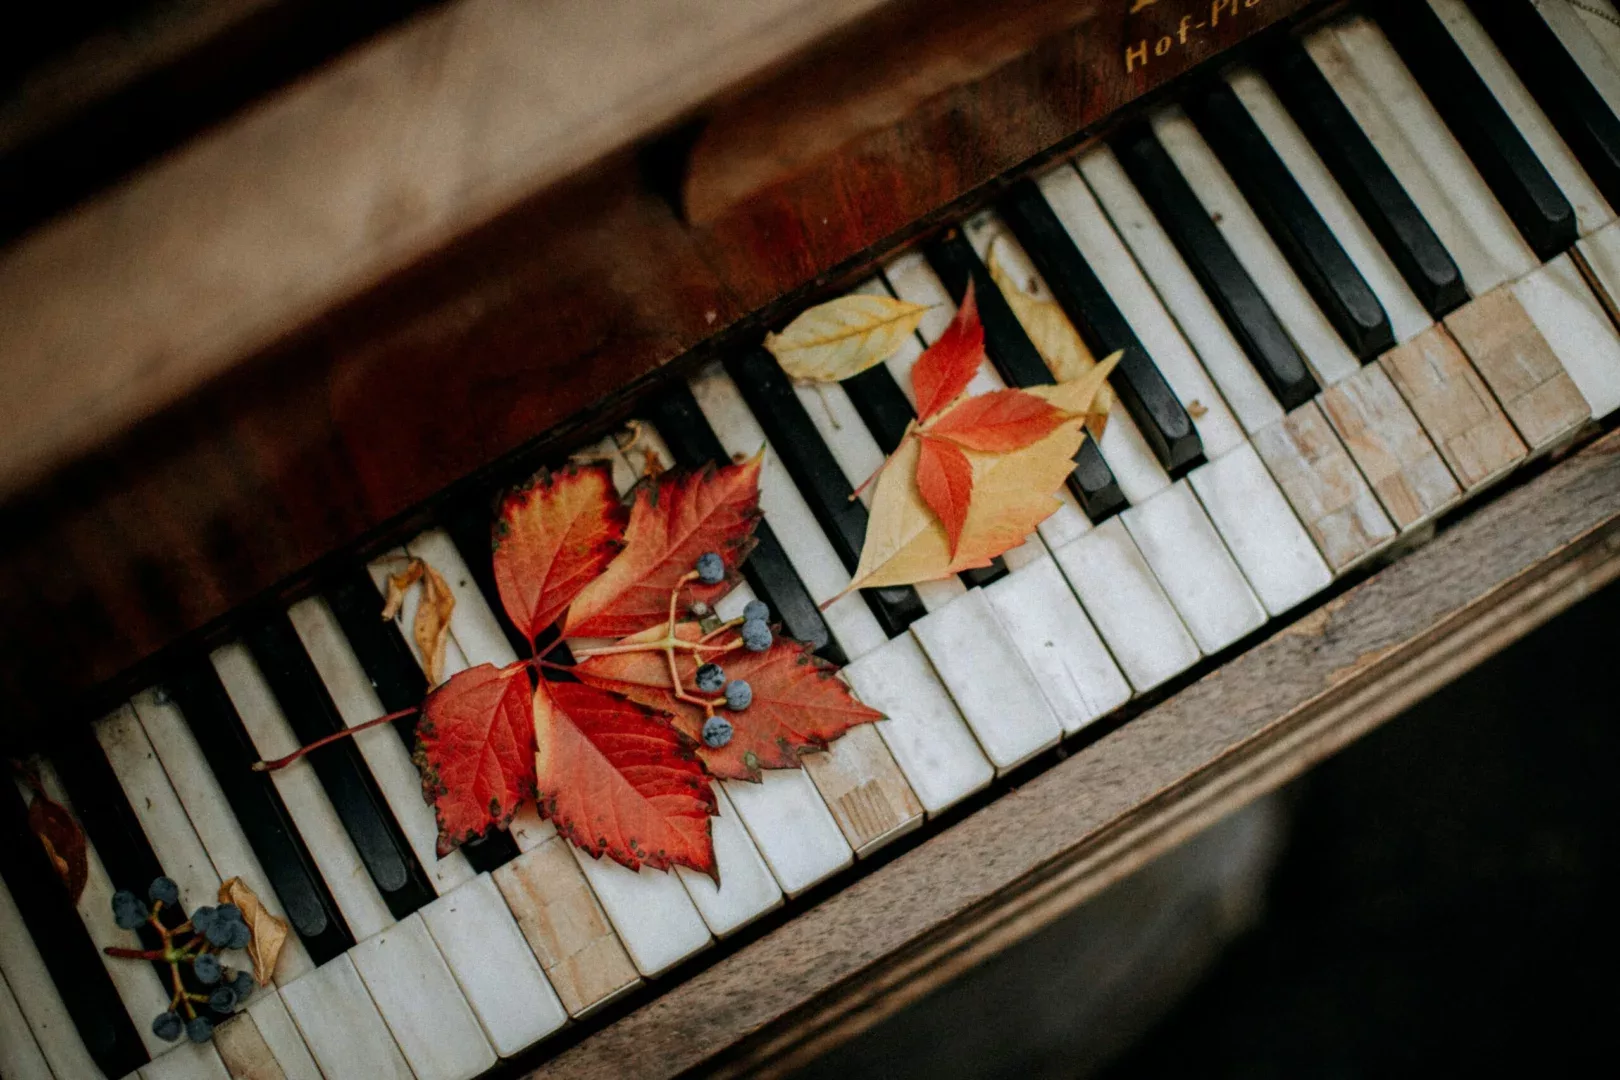 Upright piano with leaves